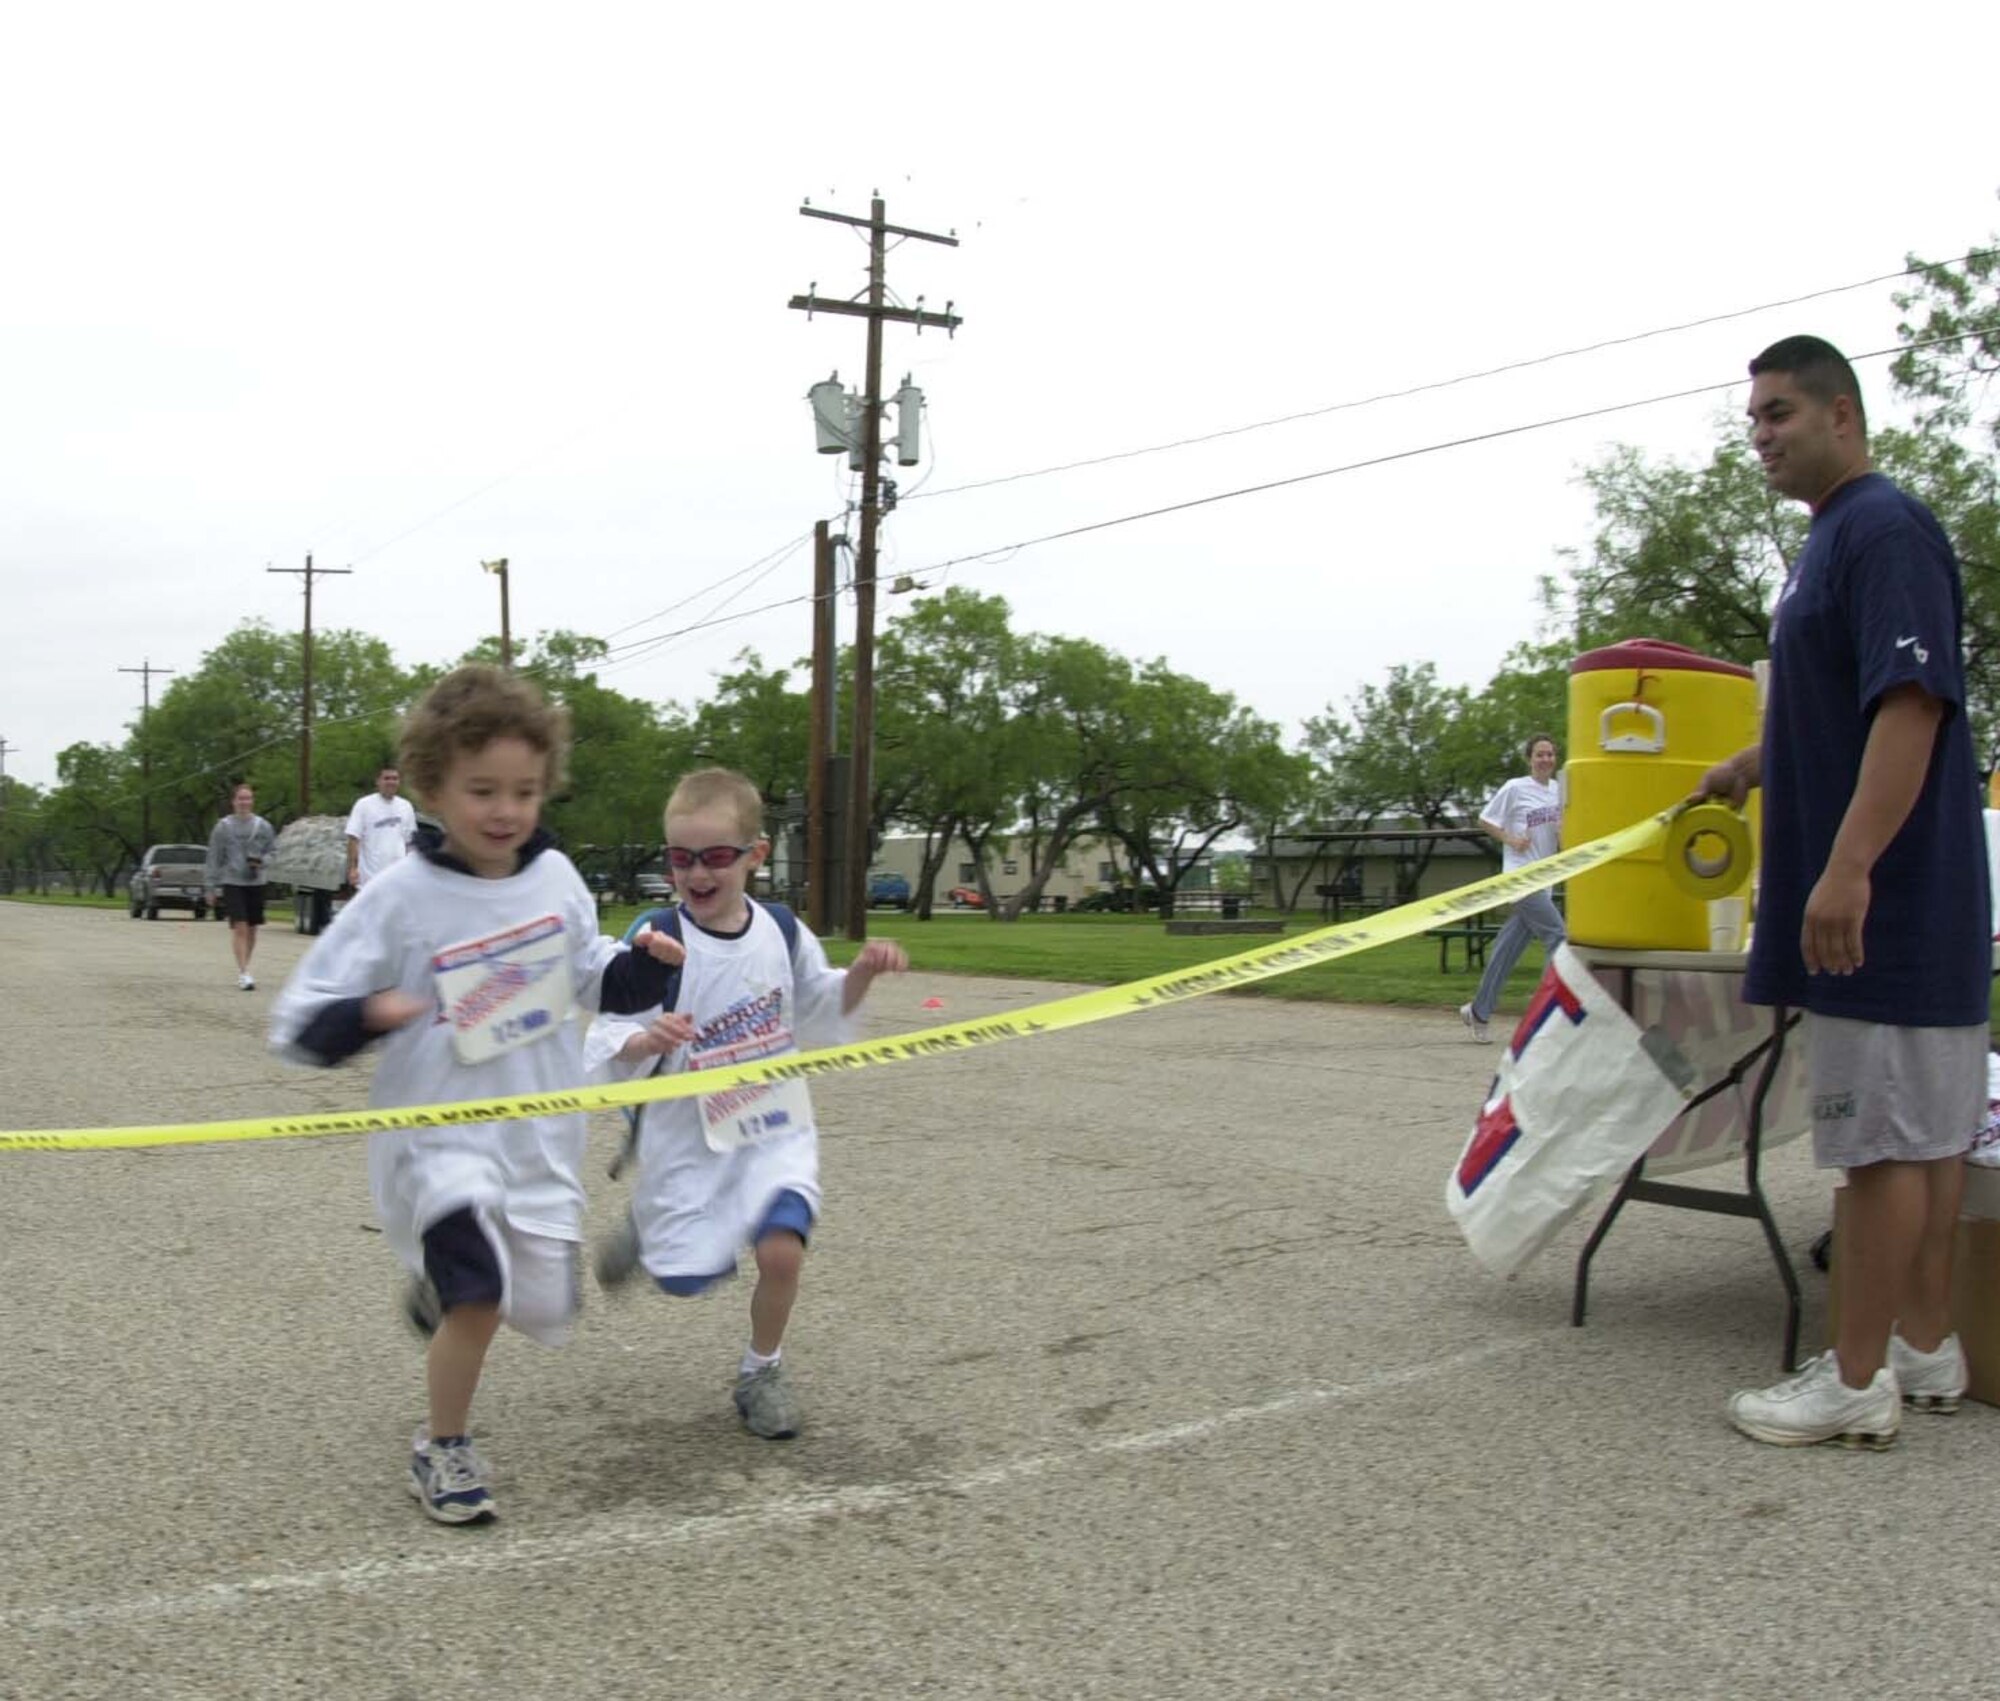 Omar Matos, Goodfellow Youth Programs sports and fitness director, watches as two young athletes dash to the finish line during the 2007 America’s Armed Forces Kids Run May 19 at the Goodfellow Recreational Camp at Lake Nasworthy. (U.S. Air Force photo by Airman 1st Class Luis Loza Gutierrez)